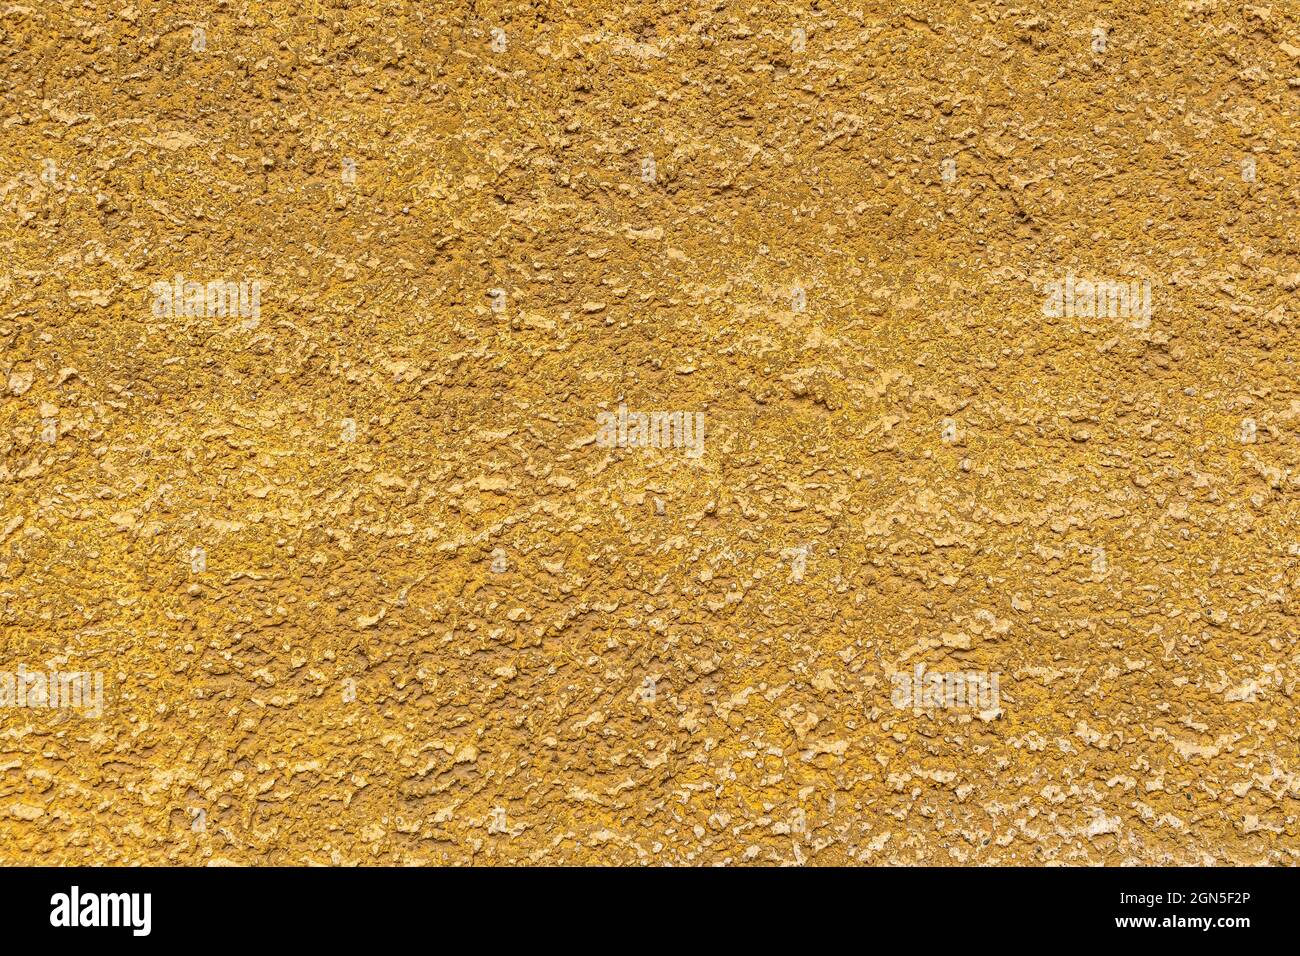 Sandy yellow, bumpy surface, plaster with abrasions Stock Photo